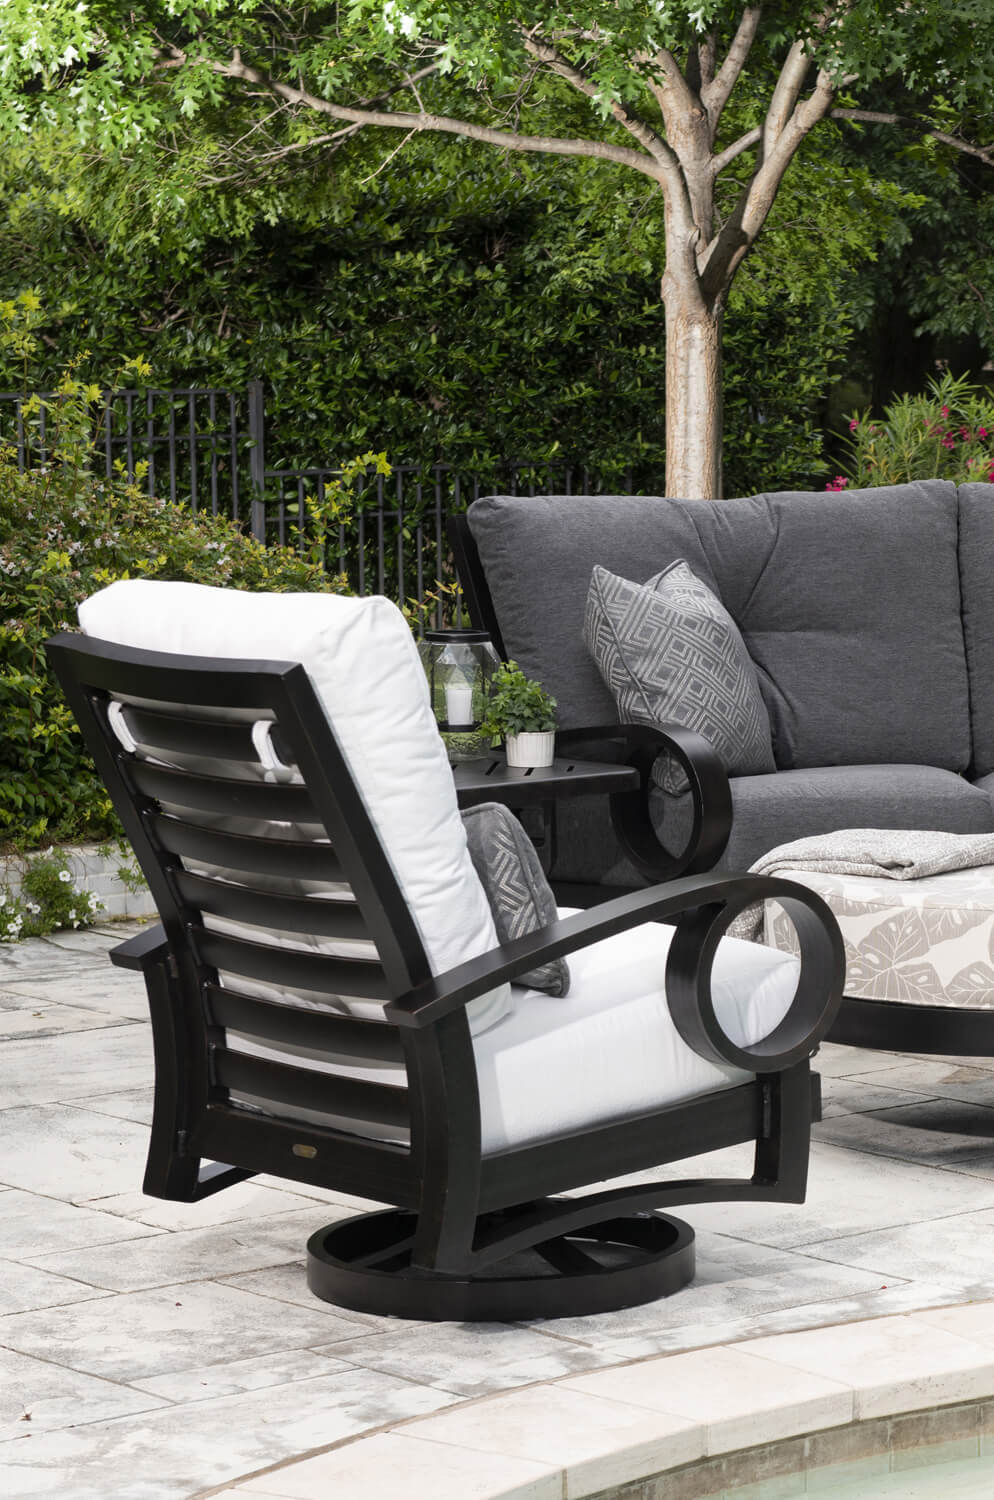 Mallin's Eclipse Outdoor Swivel Rocking Chair Outside on the Patio